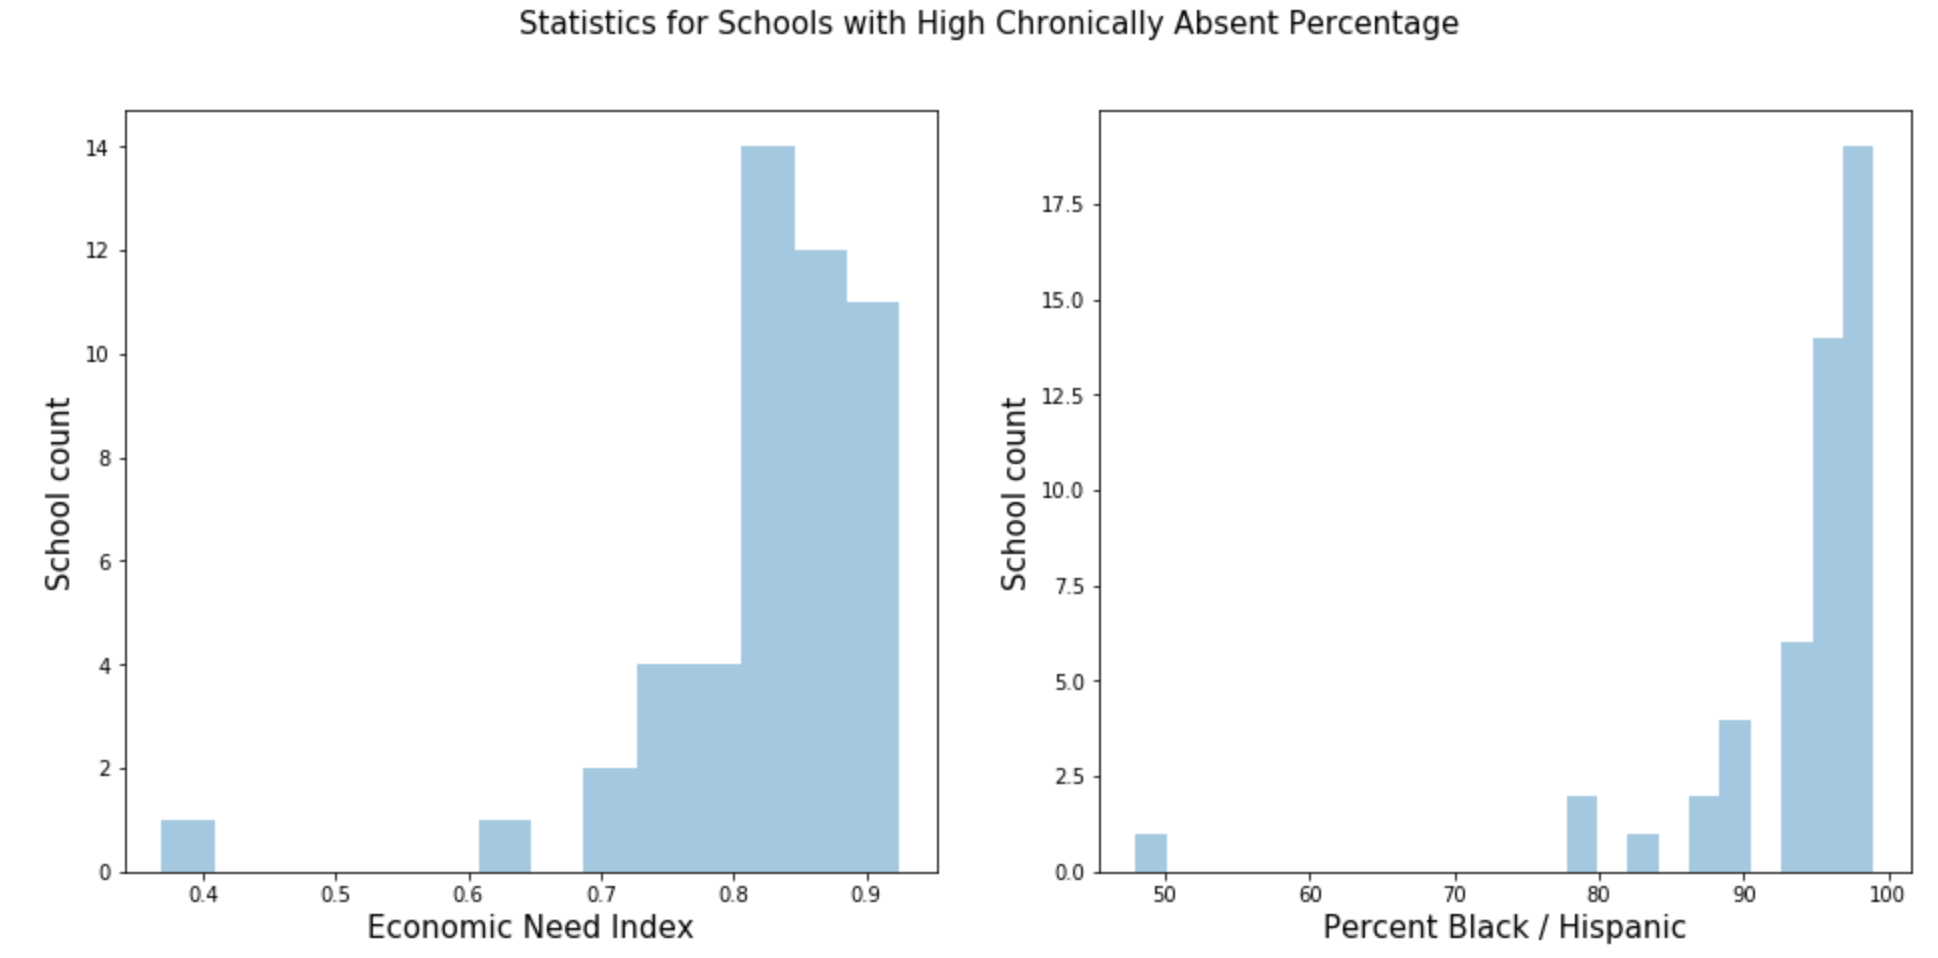 Chronically Absent Schools with regards to ENI